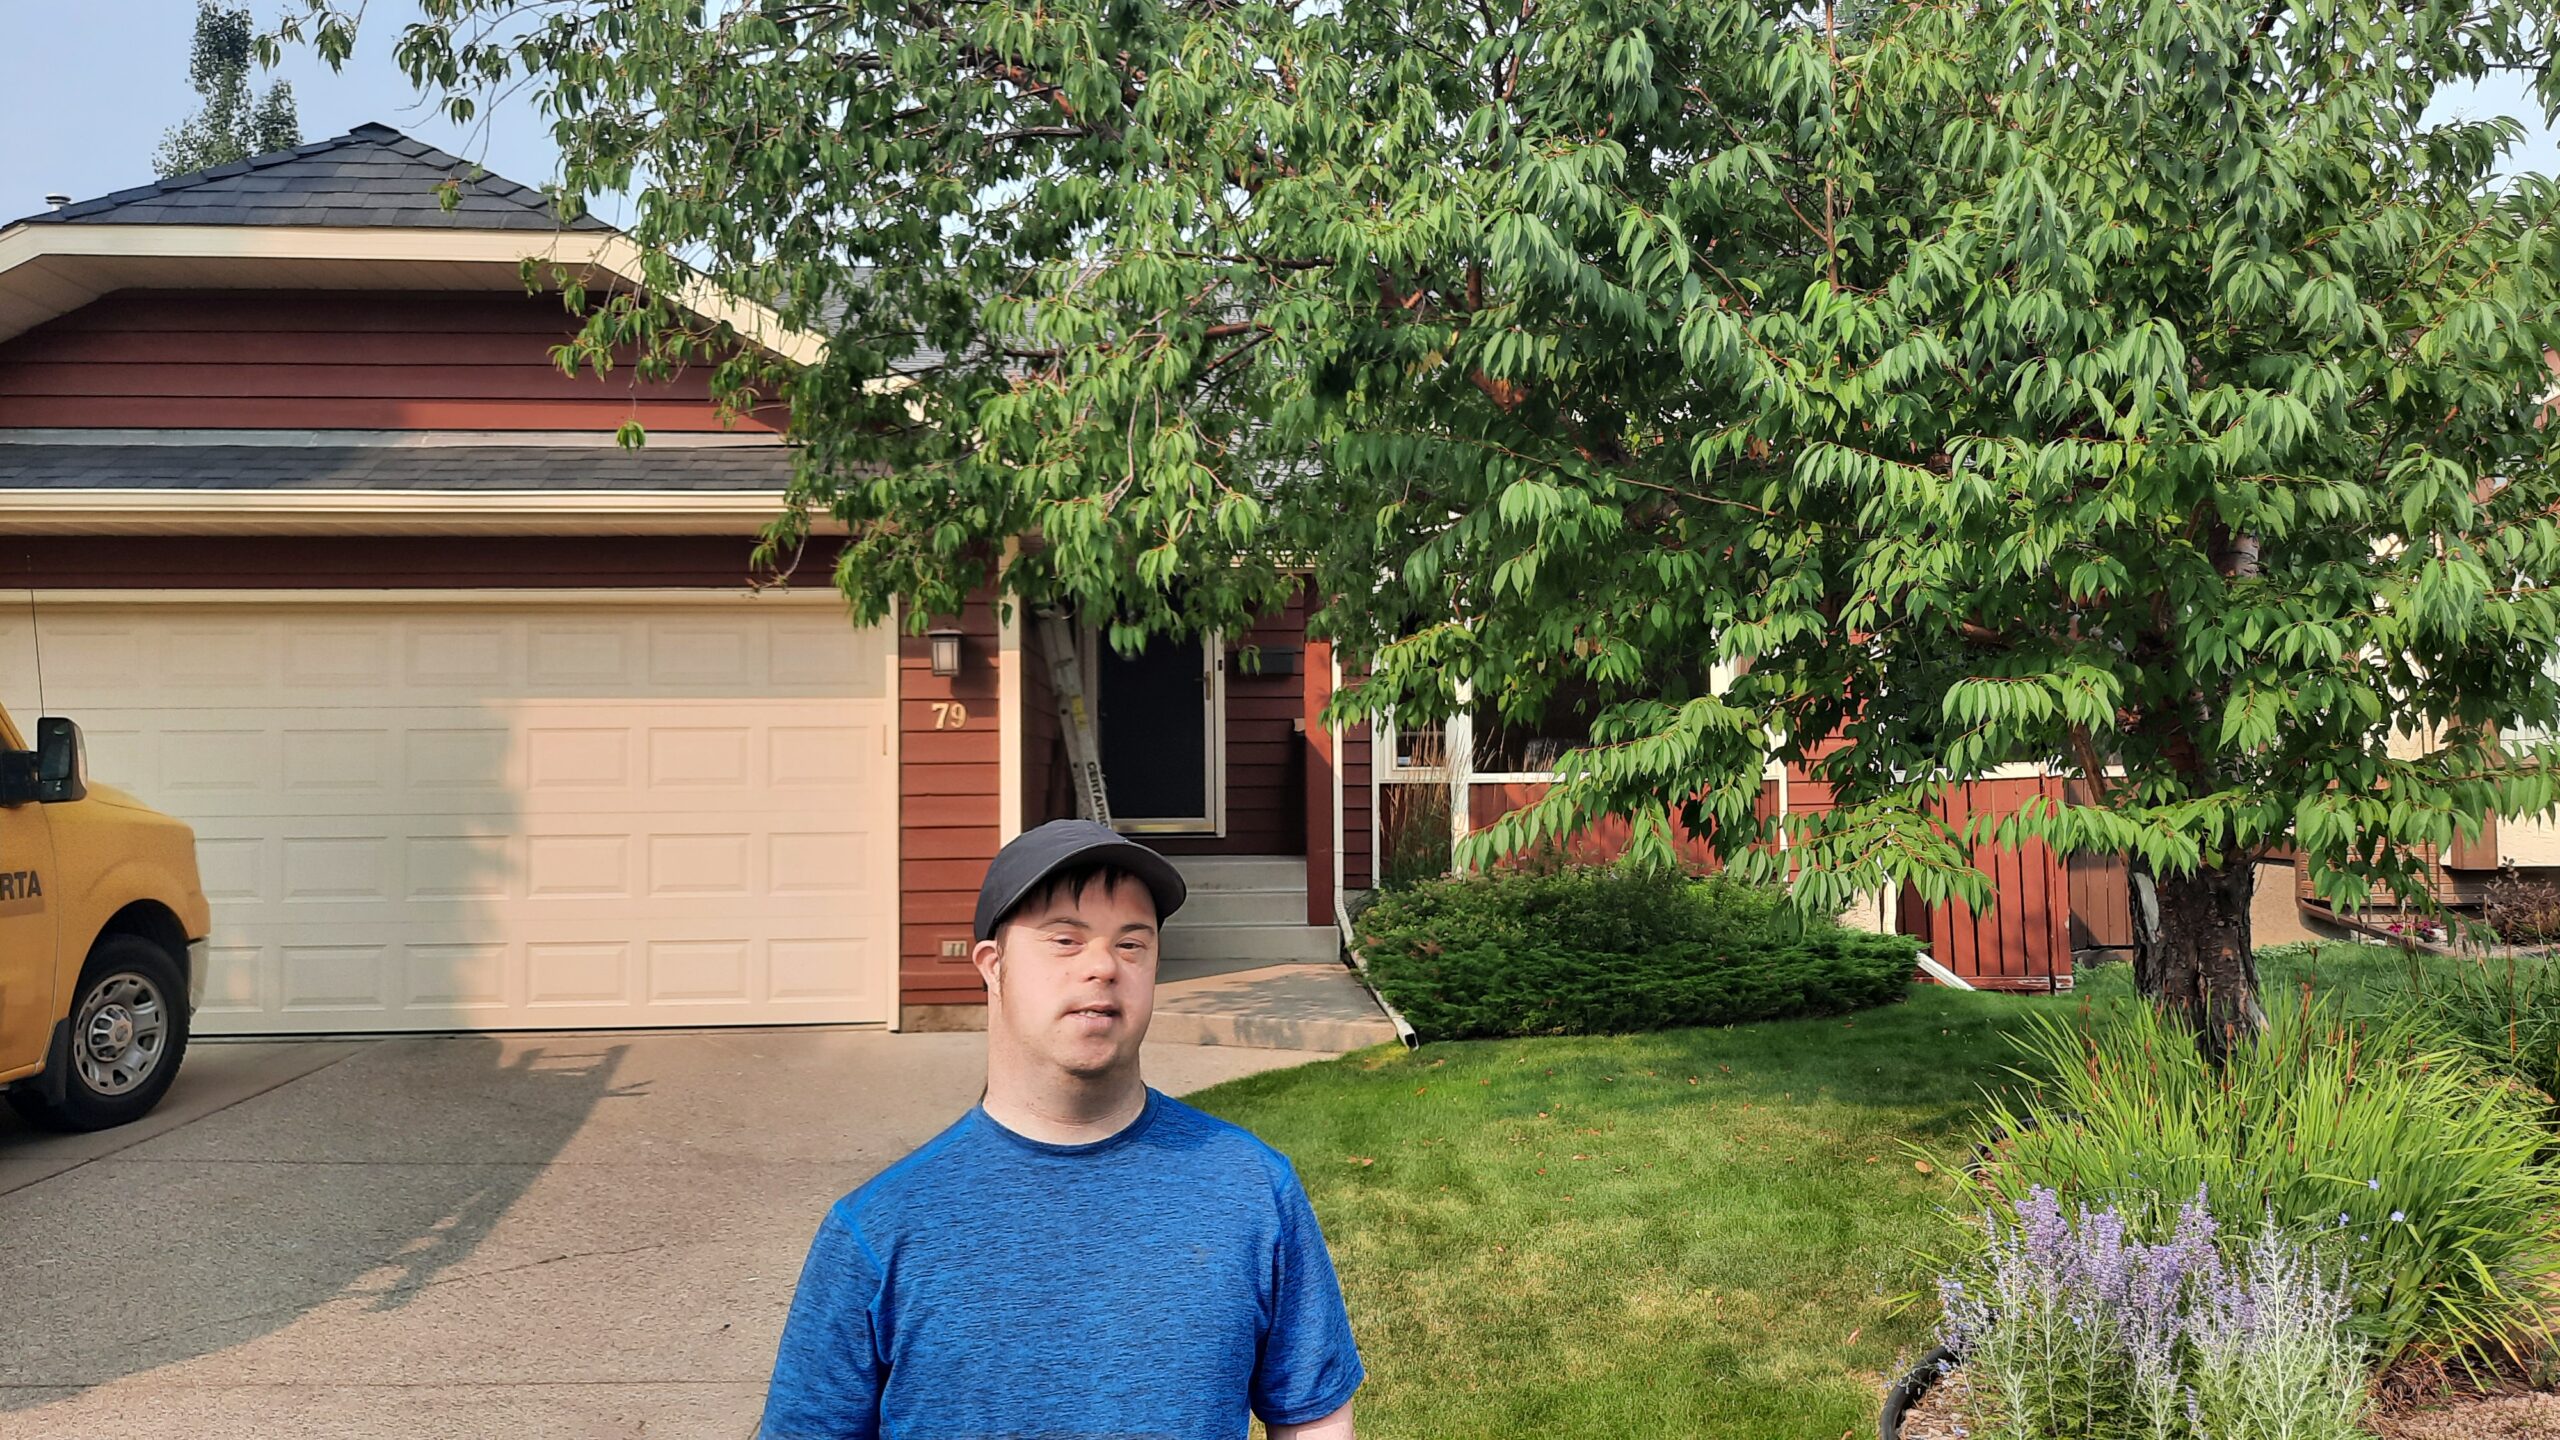 Paul stands in front of his childhood home.